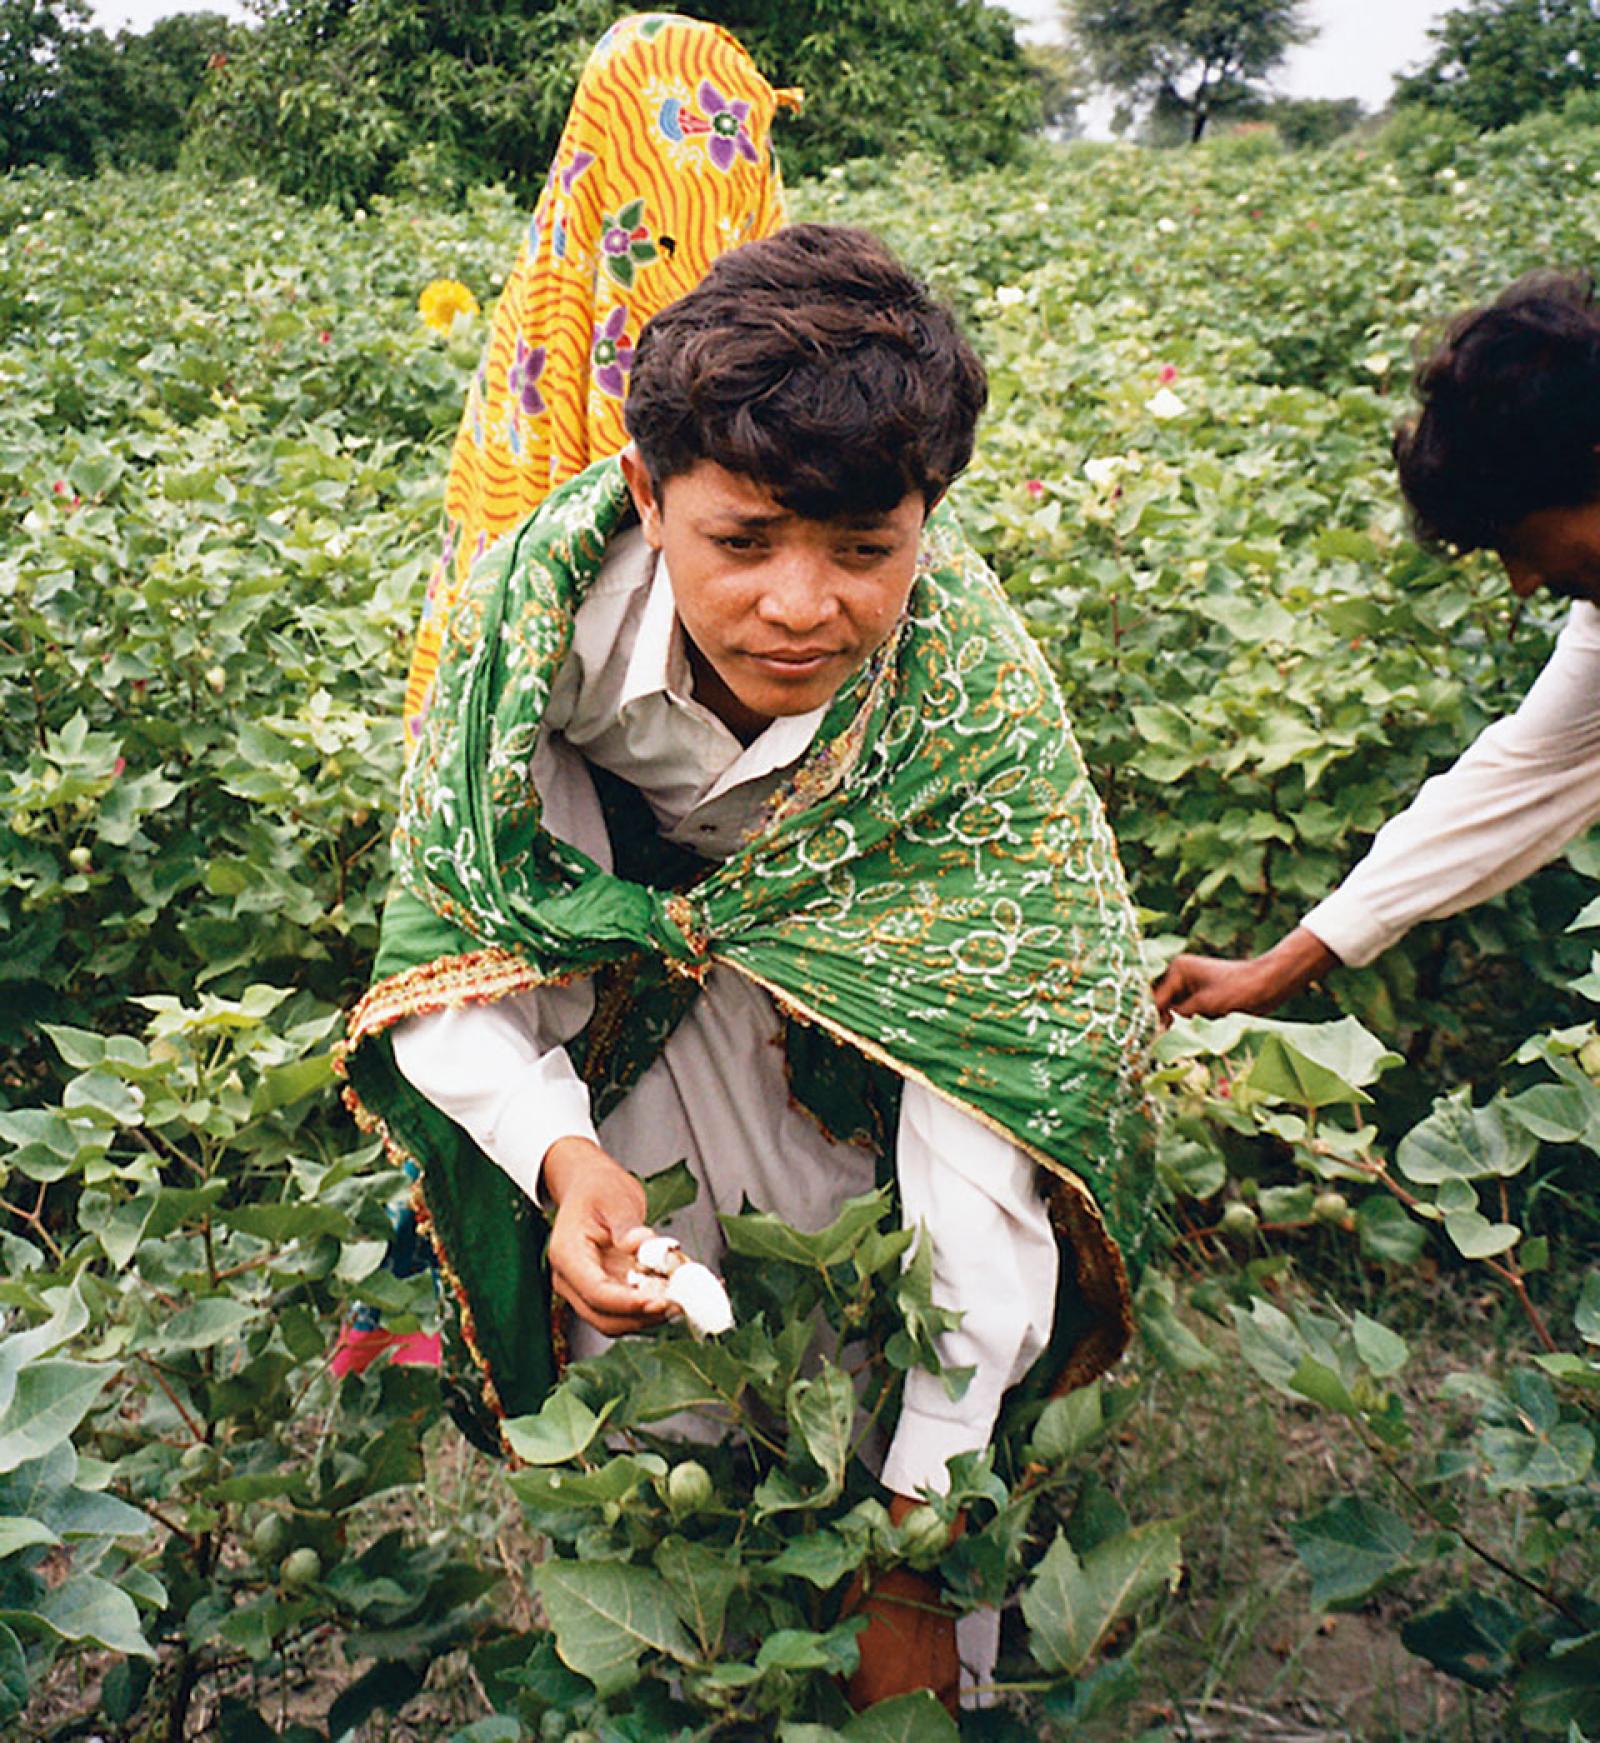 Manga Ram working in the fields as a child.